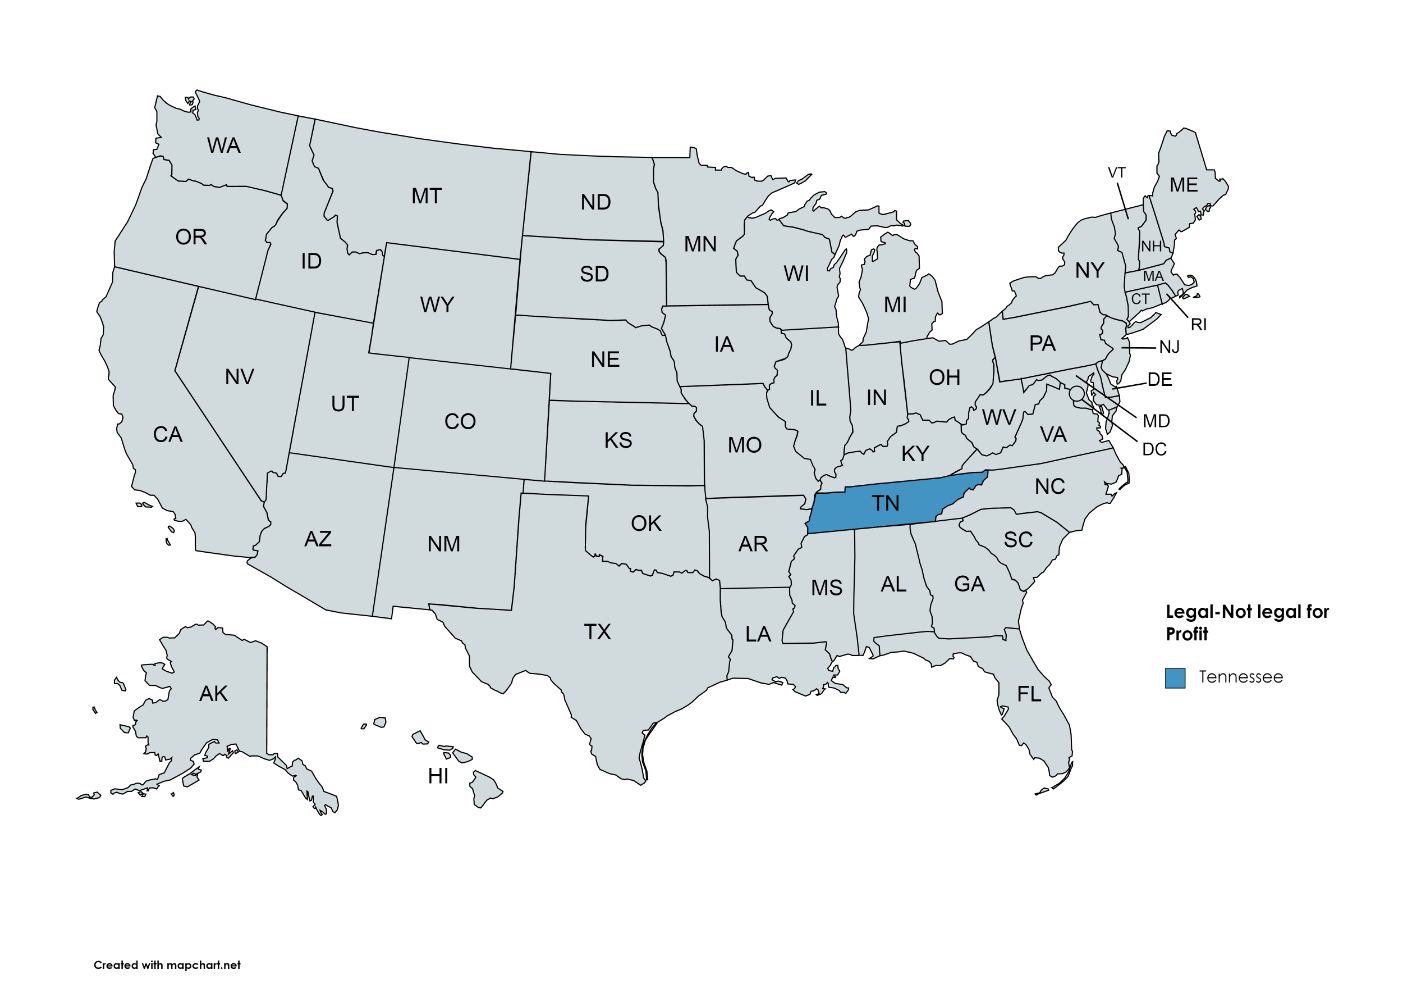 map of states of United states of America highlighting the state in blue having legal-not legal for profit status in case of lock picking. the state is Tennessee